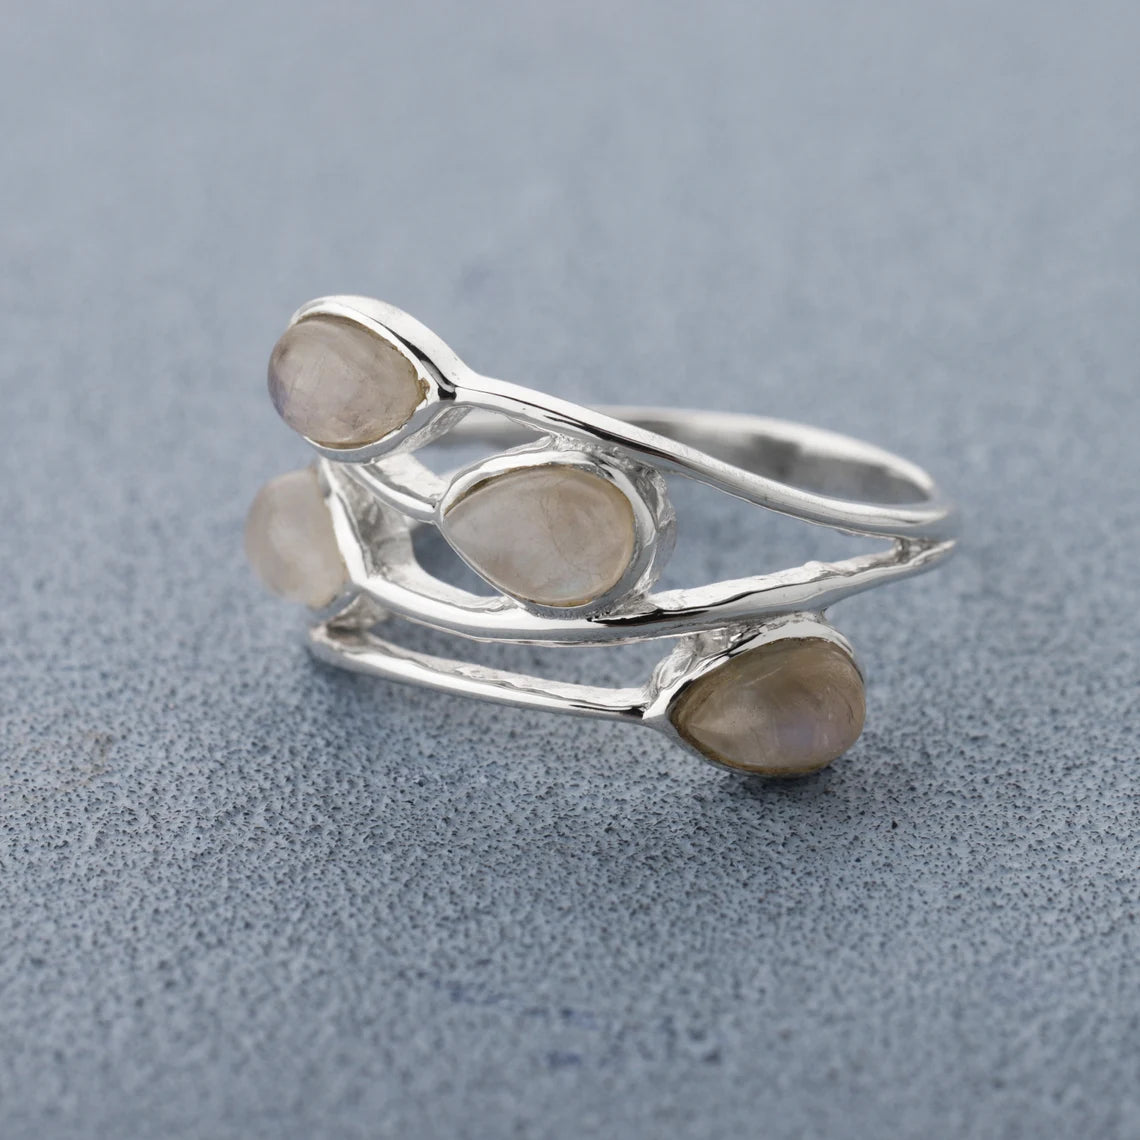 Natural Rainbow Moonstone - 925 Sterling Silver - 3 X 5 MM Pear Cabochon - Multi Stone Ring - Multi Color Ring - Handmade Moonstone Ring